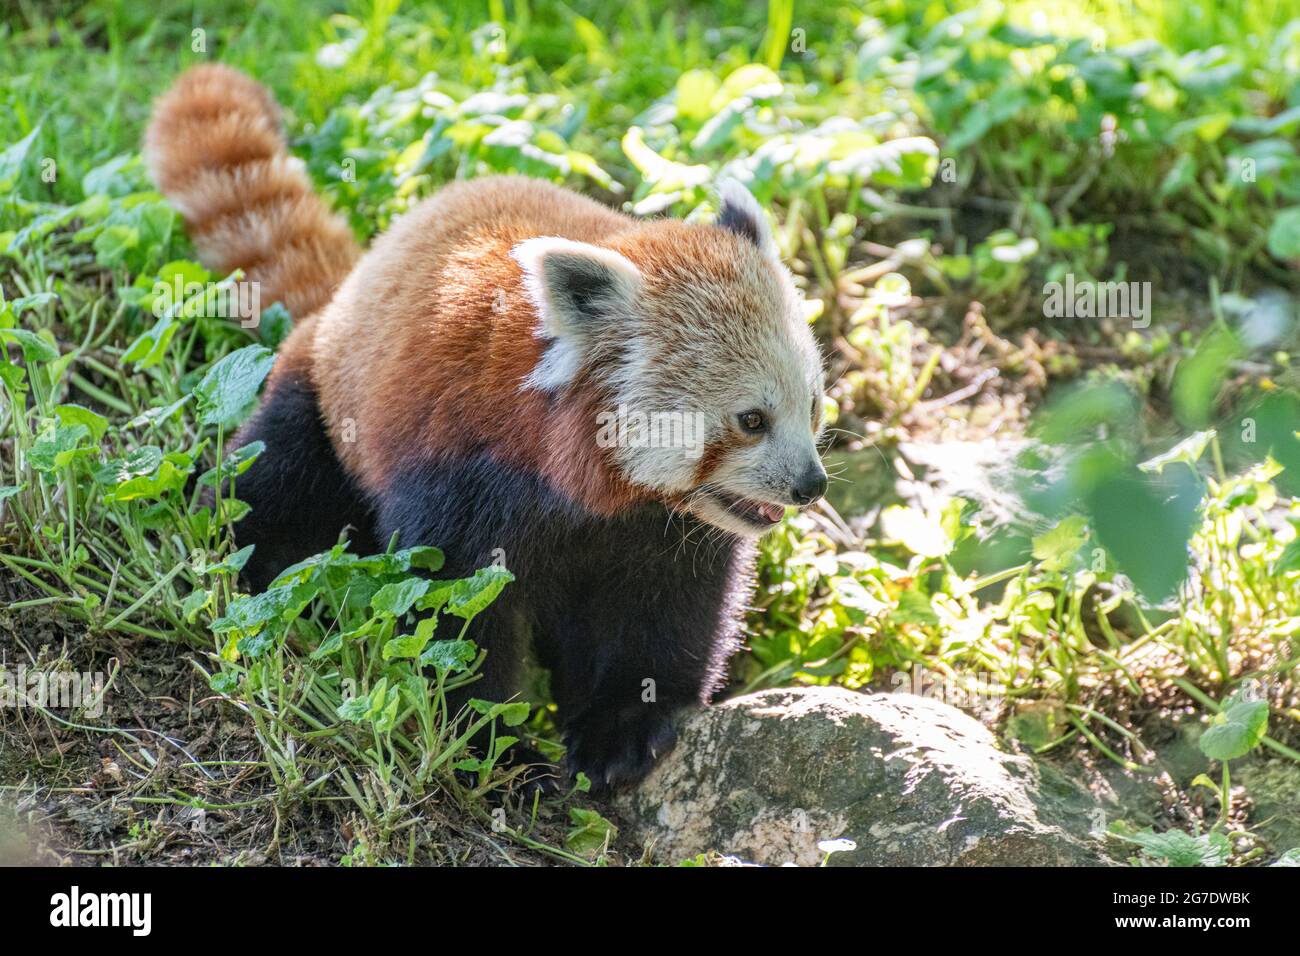 side portrait of a red panda on the ground Stock Photo